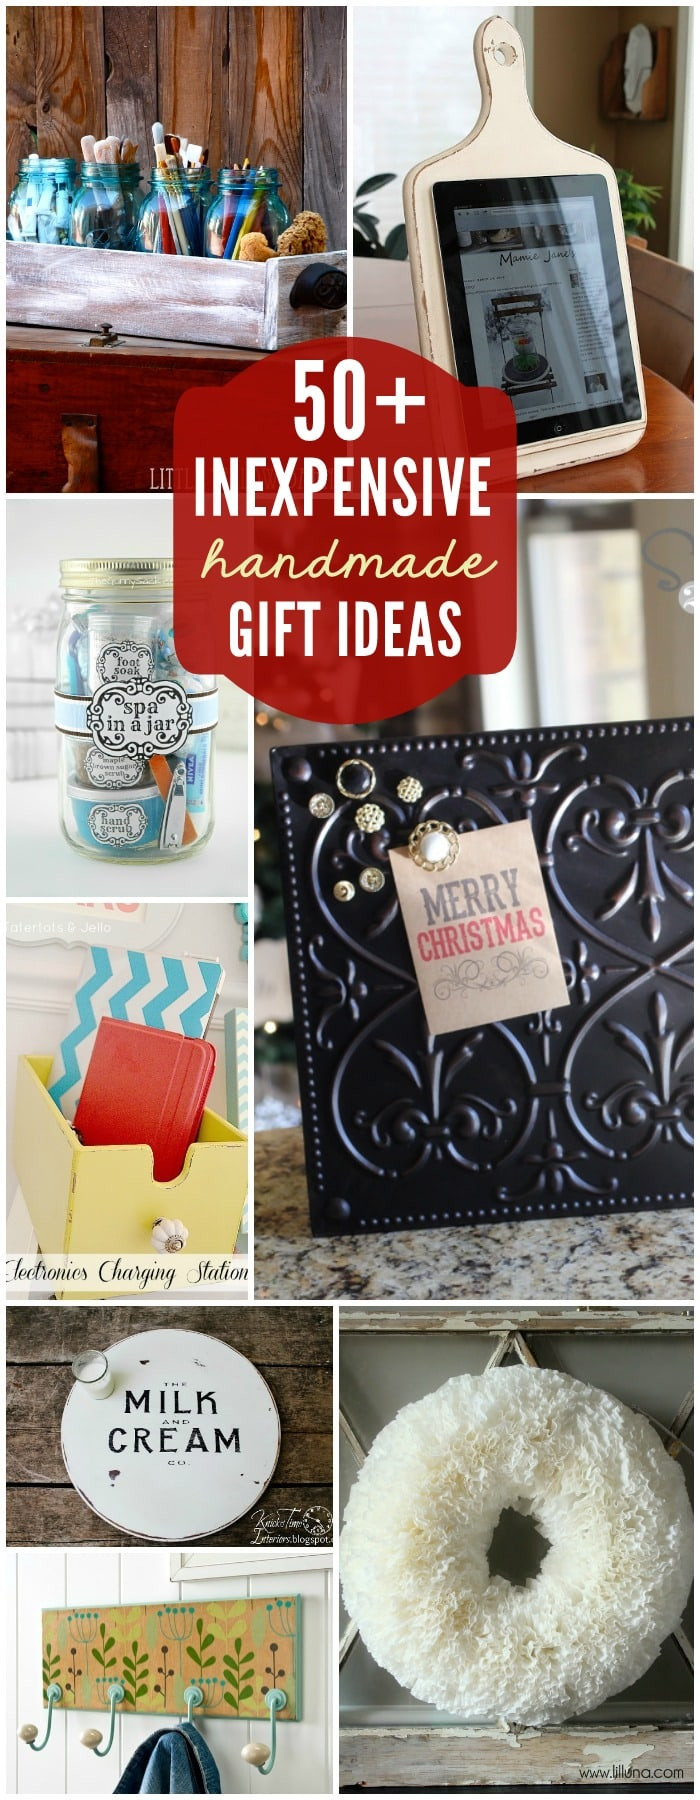 Great Holiday Gift Ideas
 75 Gift Ideas under $5